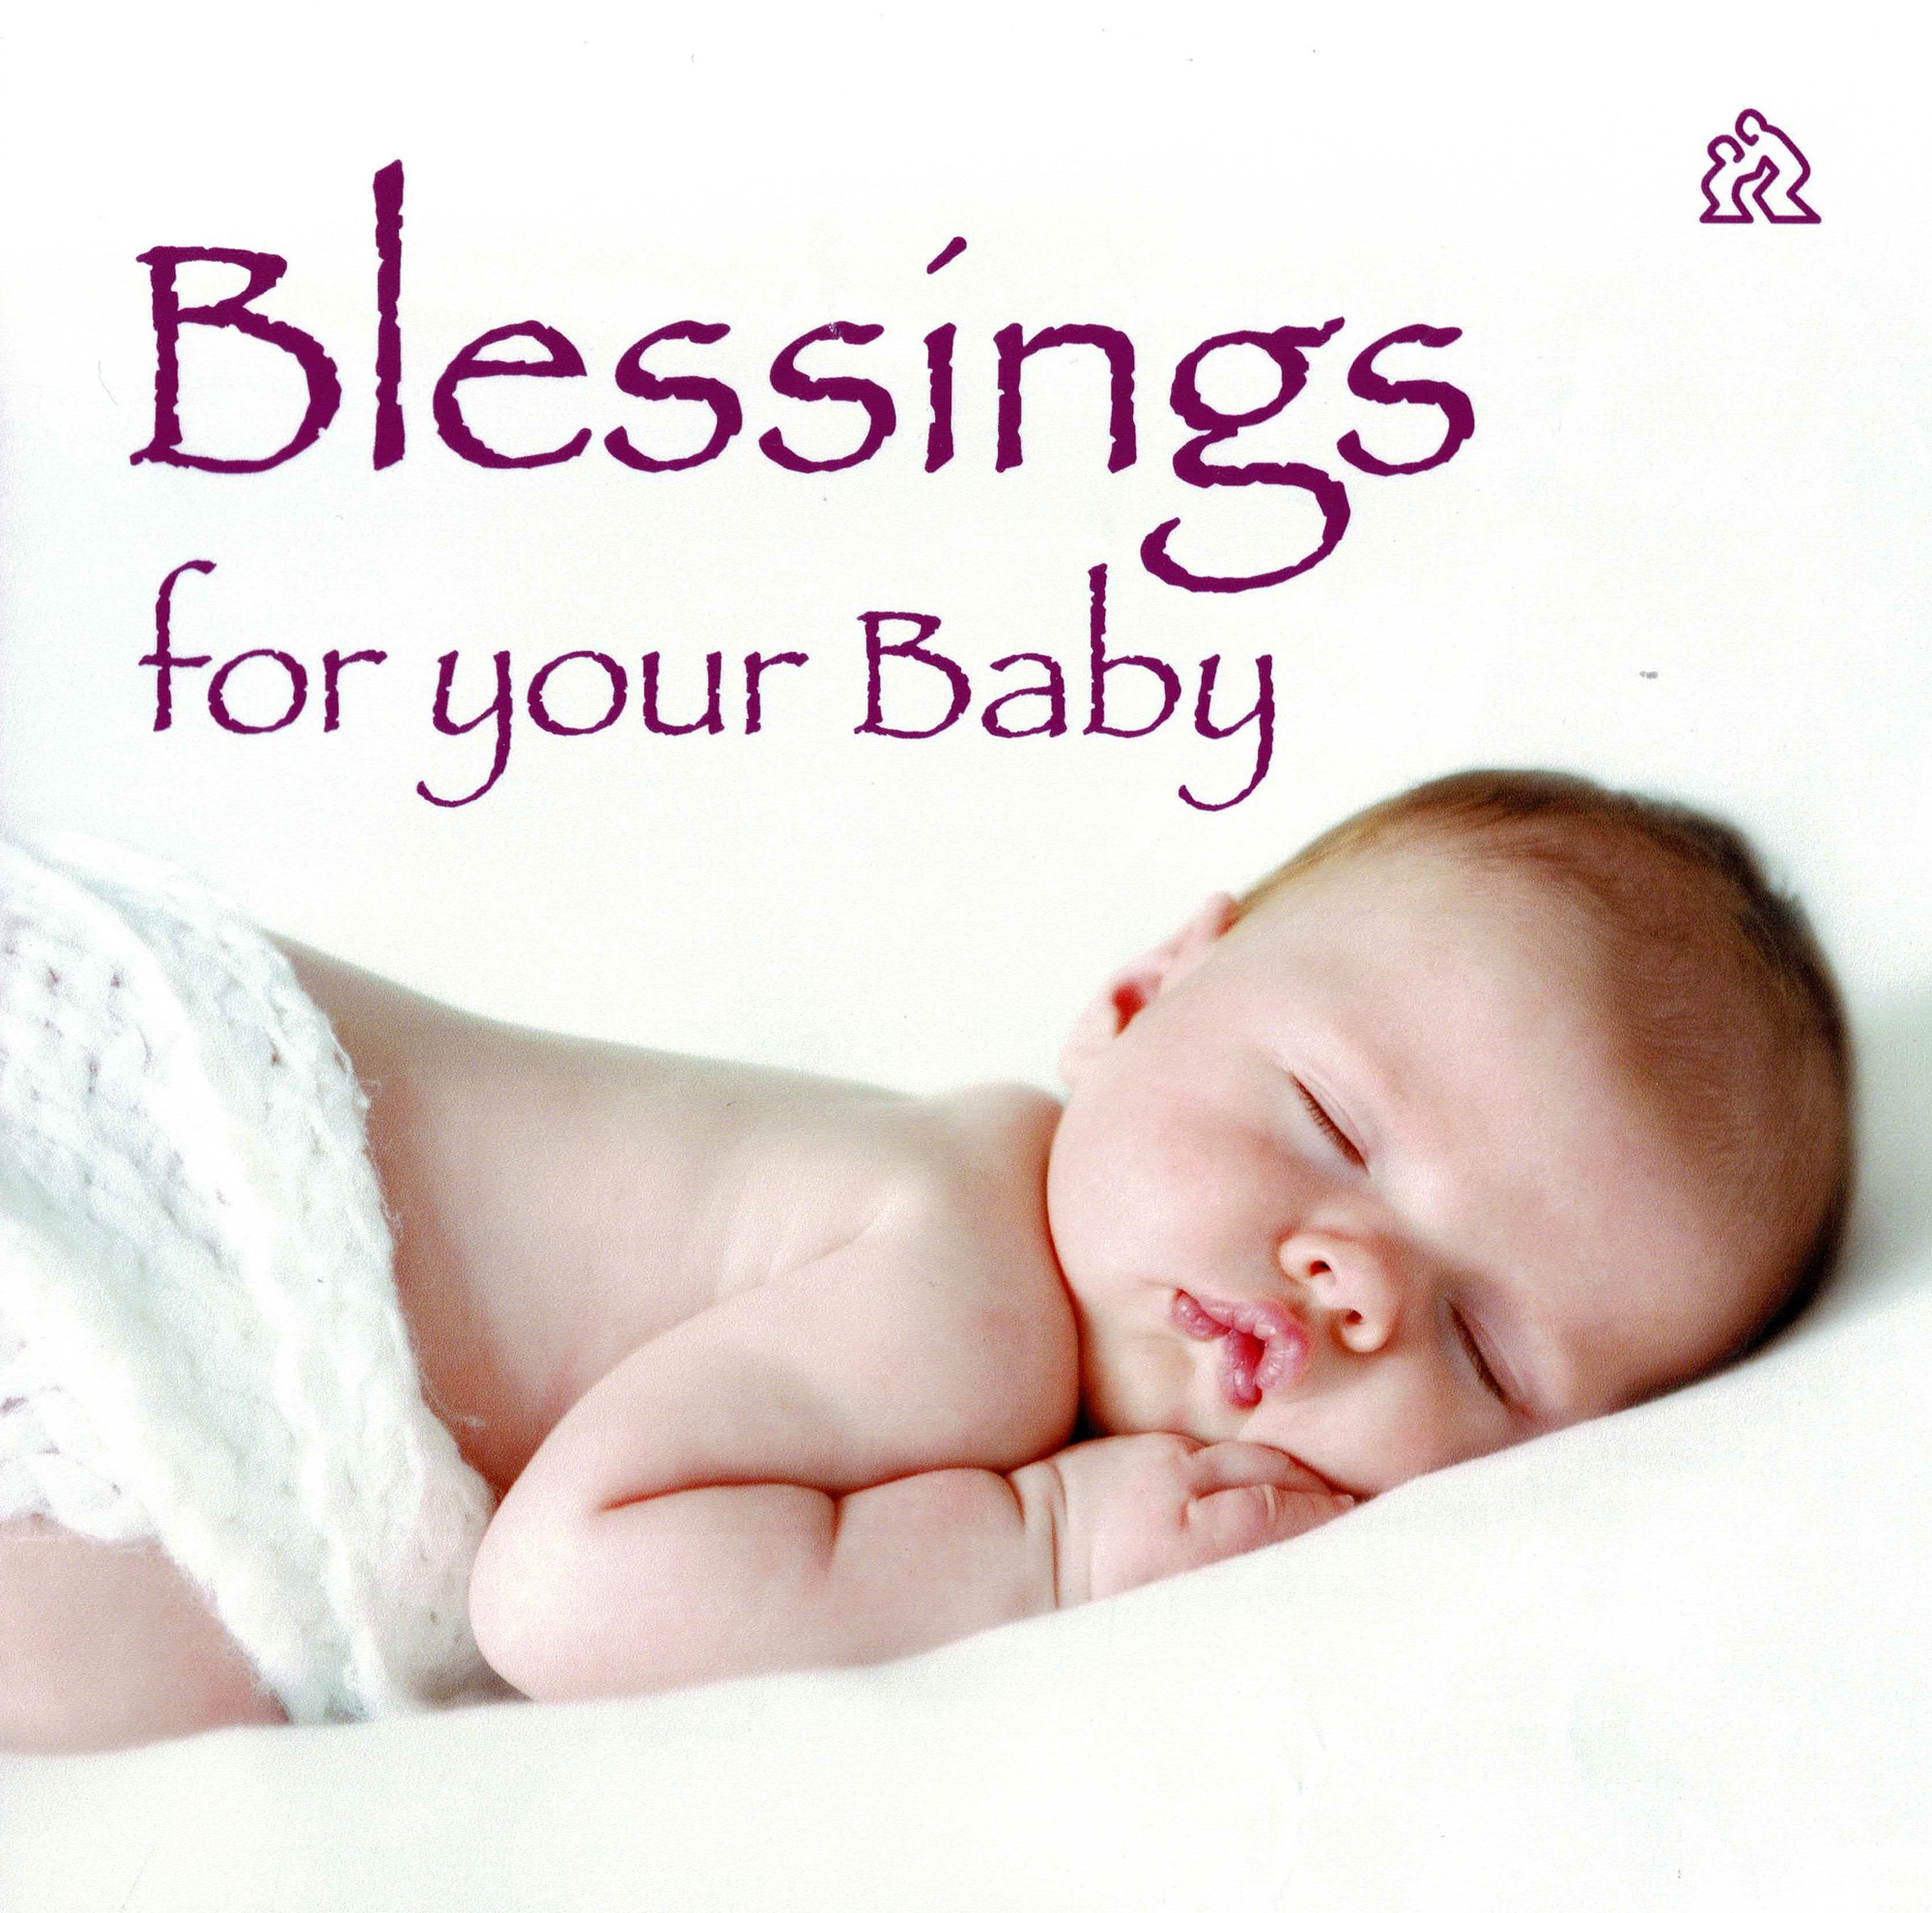 New Baby Blessing Quotes
 Newborn Baby Blessing newborn baby